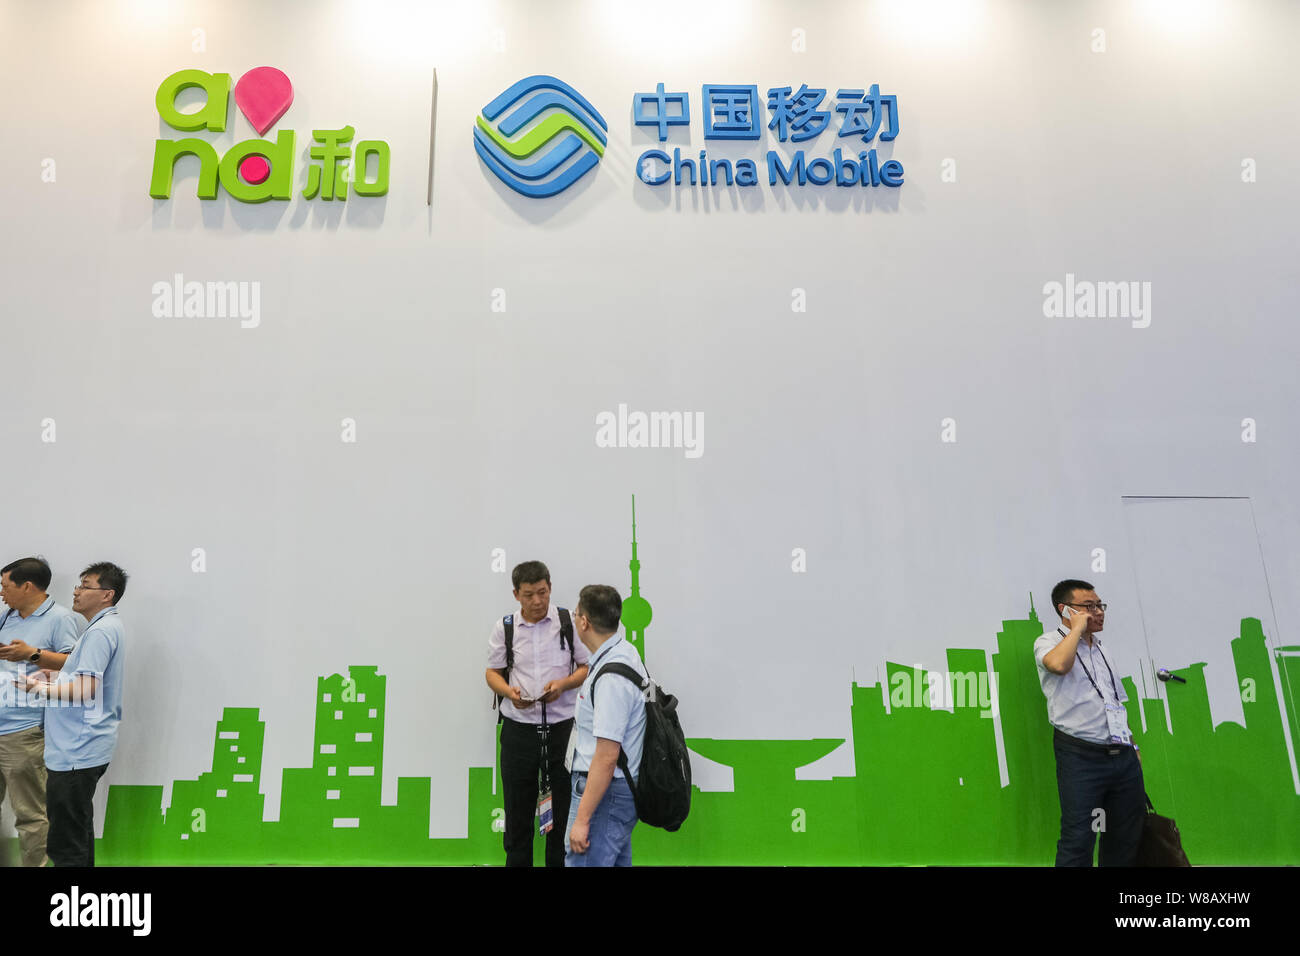 People visit the stand of China Mobile during the 2016 Mobile World Congress (MWC) in Shanghai, China, 29 June 2016.   China Mobile Communications Cor Stock Photo